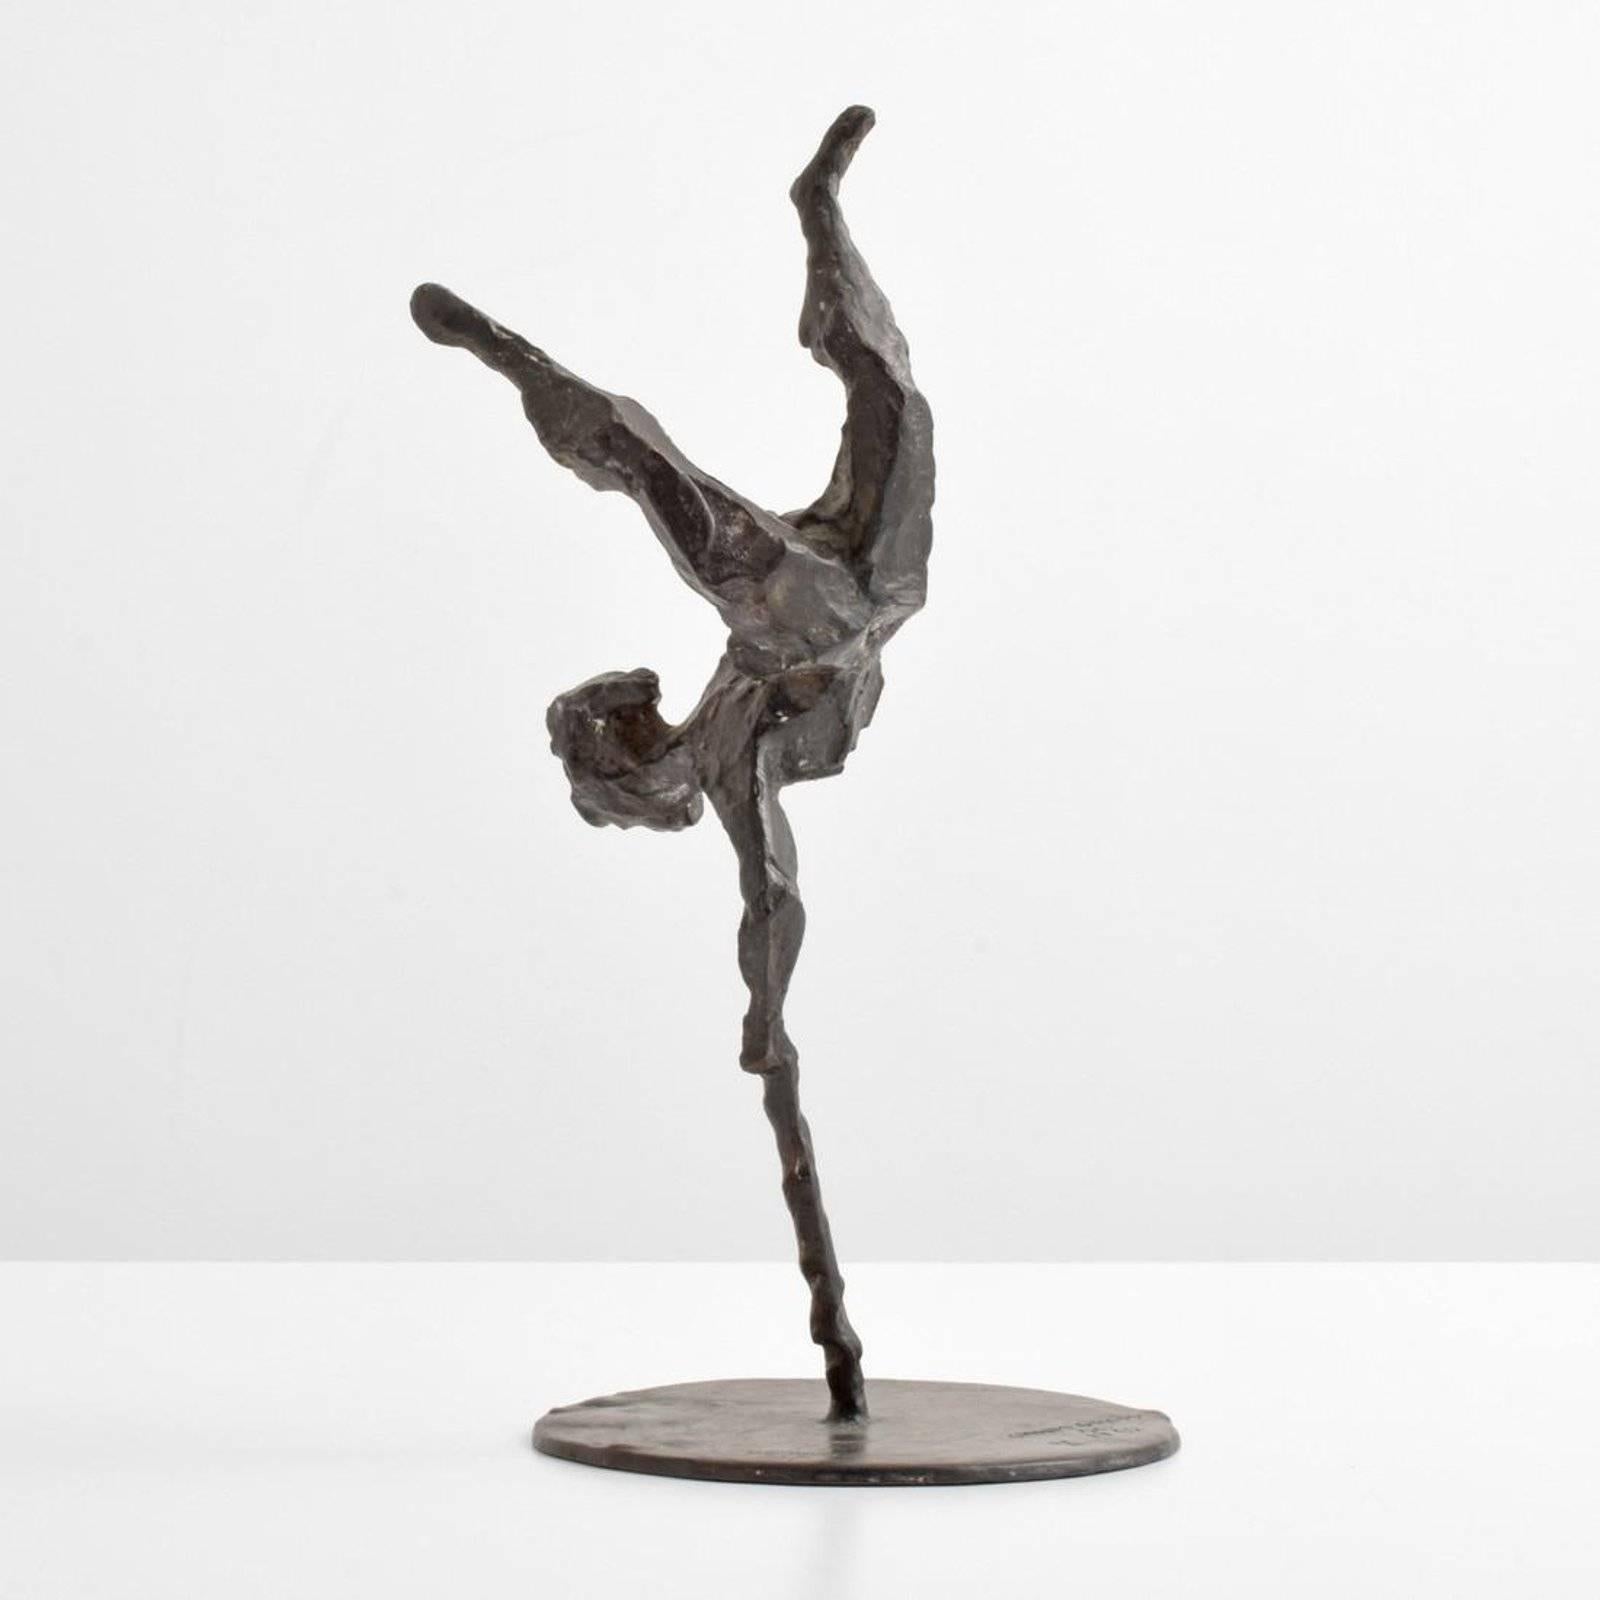 Bronze sculpture by Chaim Gross (1904-1991). Work is untitled, but is one of several we have seen referred to as Handstand. Foundry mark reads Bedi Makky NYC. Provenance: Acquired from the artist by Leonard L. Farber (died 2005) of Fort Lauderdale,